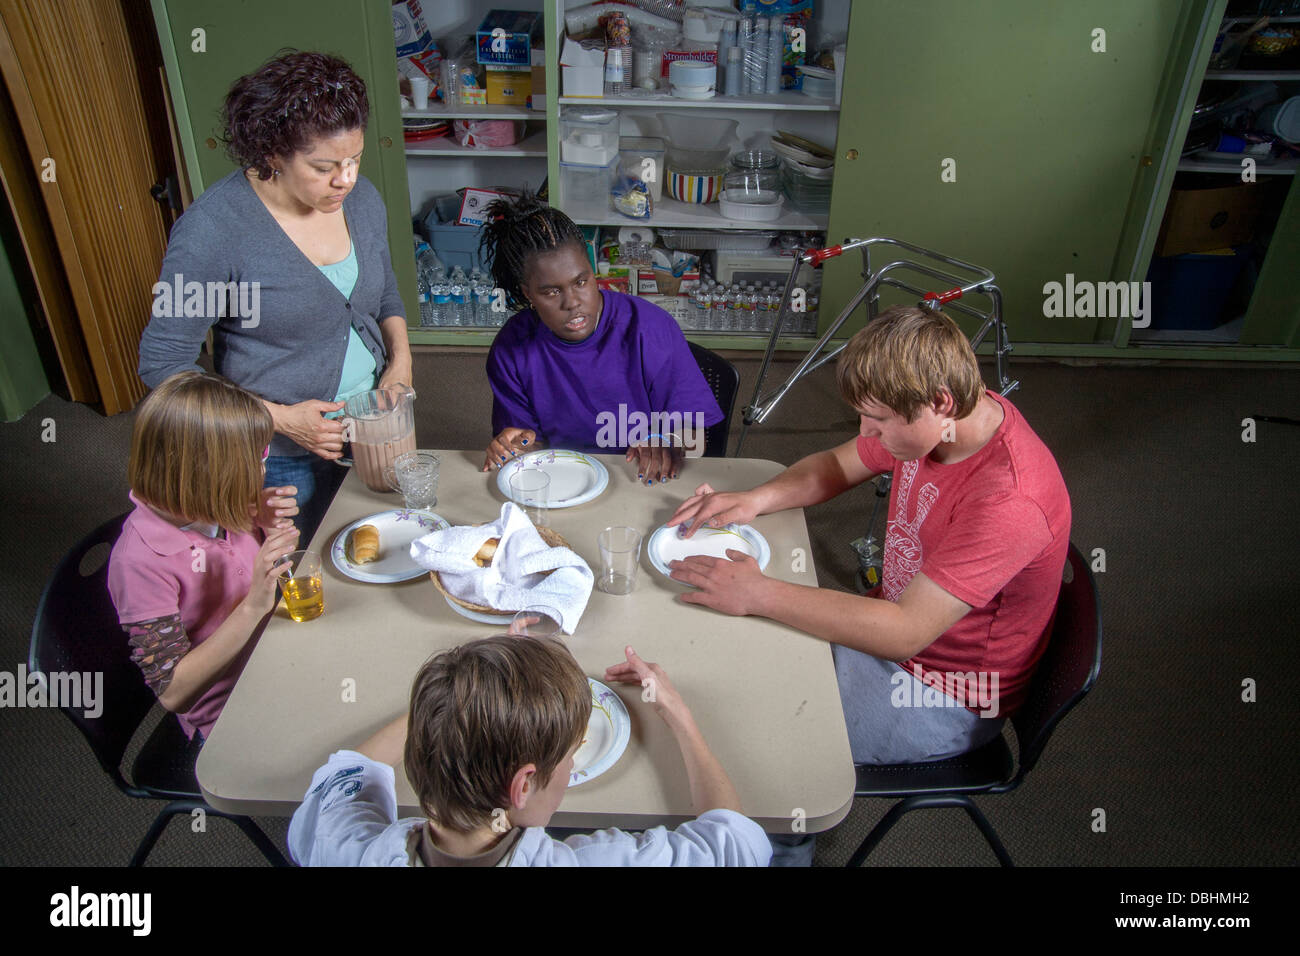 A teacher joins her blind and handicapped students sampling food they made in a baking and cooking class Stock Photo